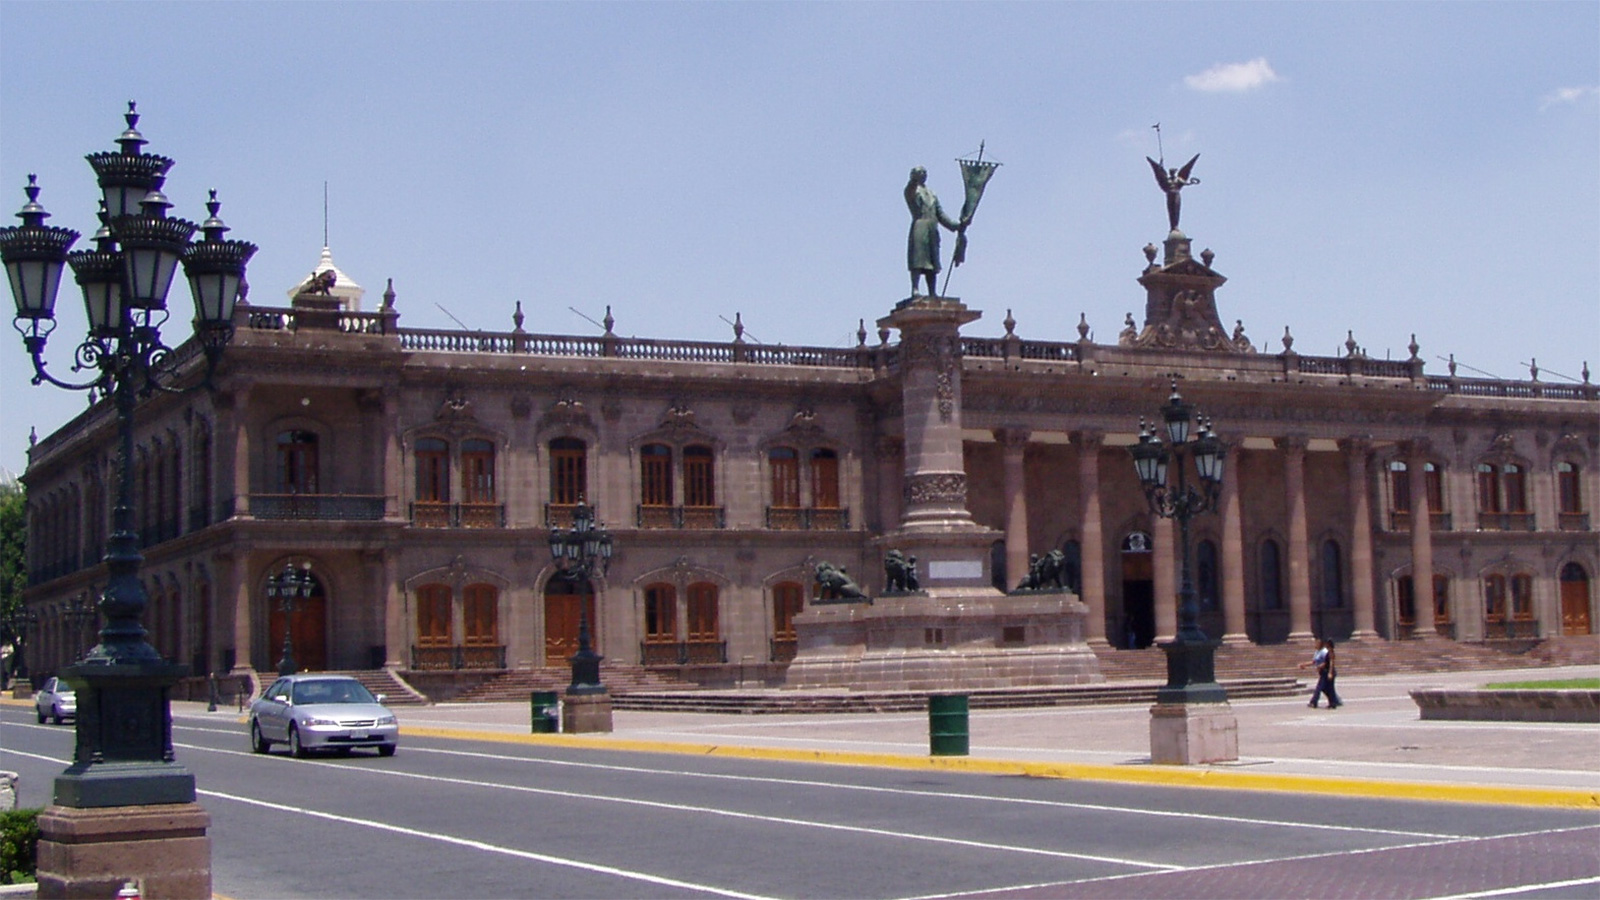 Image of the capital of Nuevo León